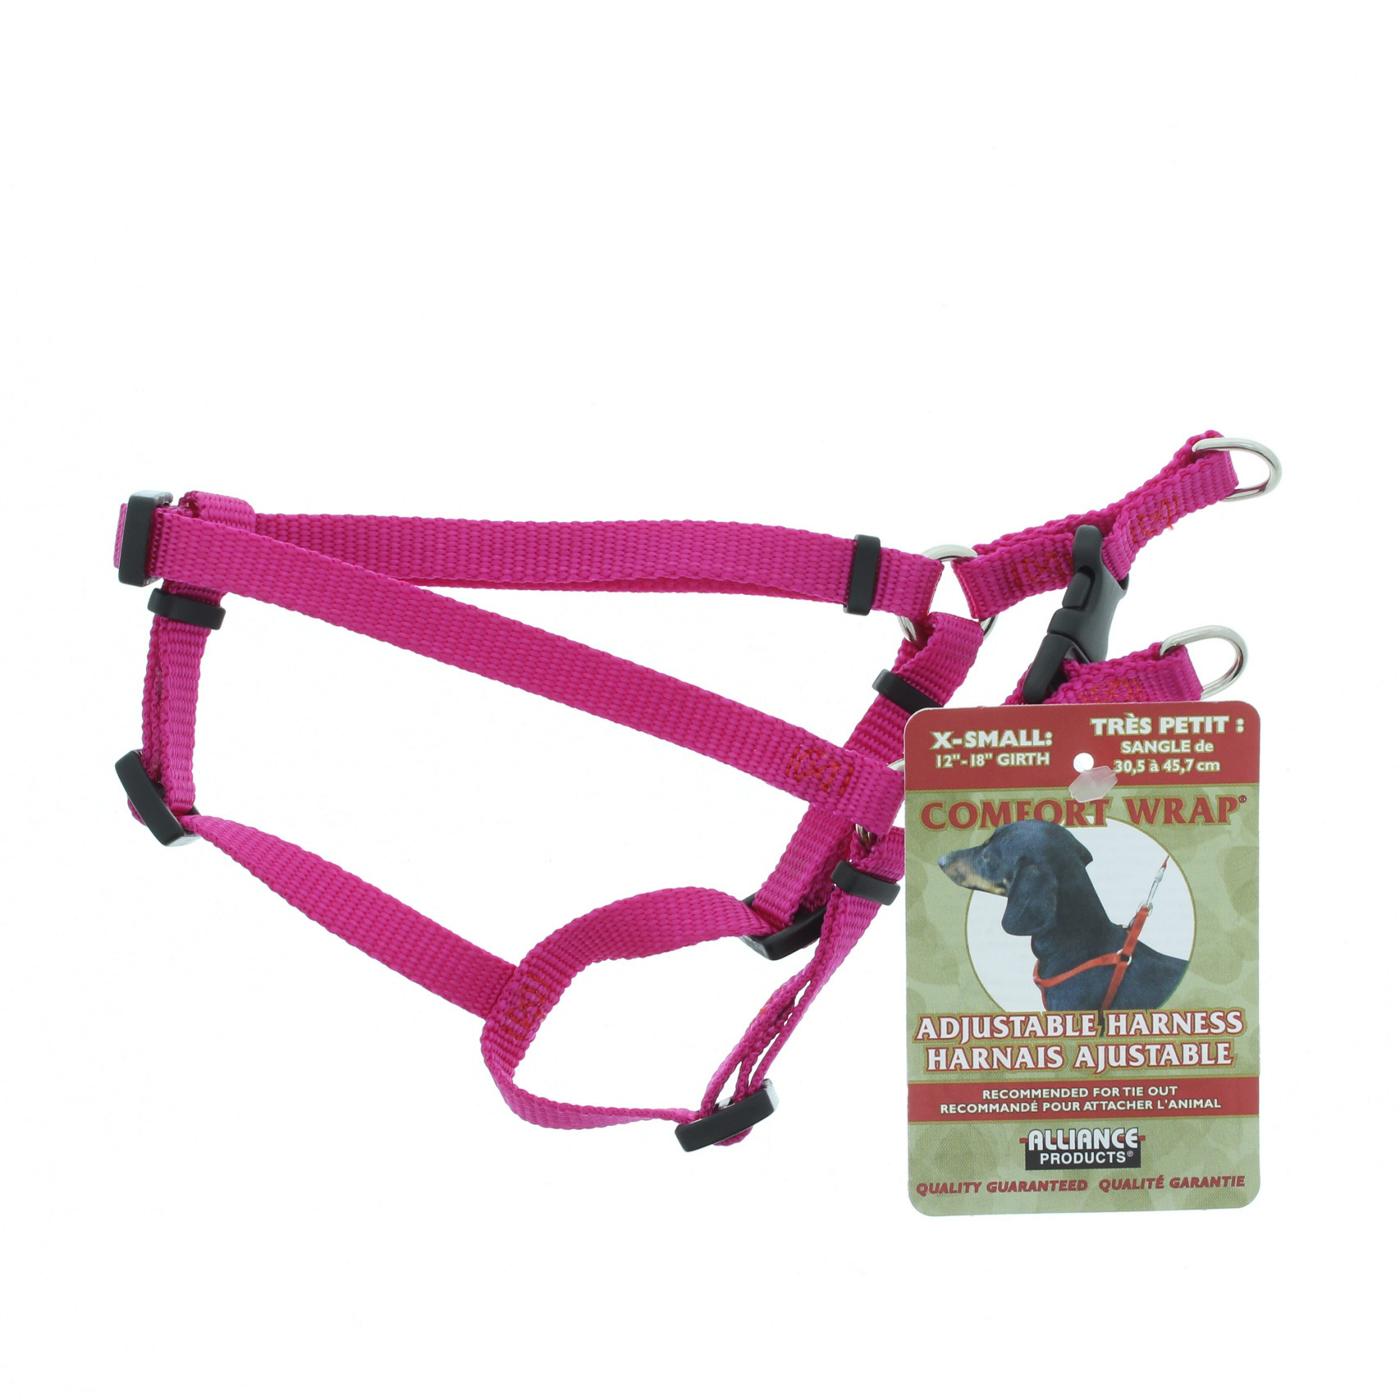 Alliance Comfort Wrap Nylon XS Harness Assorted Colors; image 2 of 2